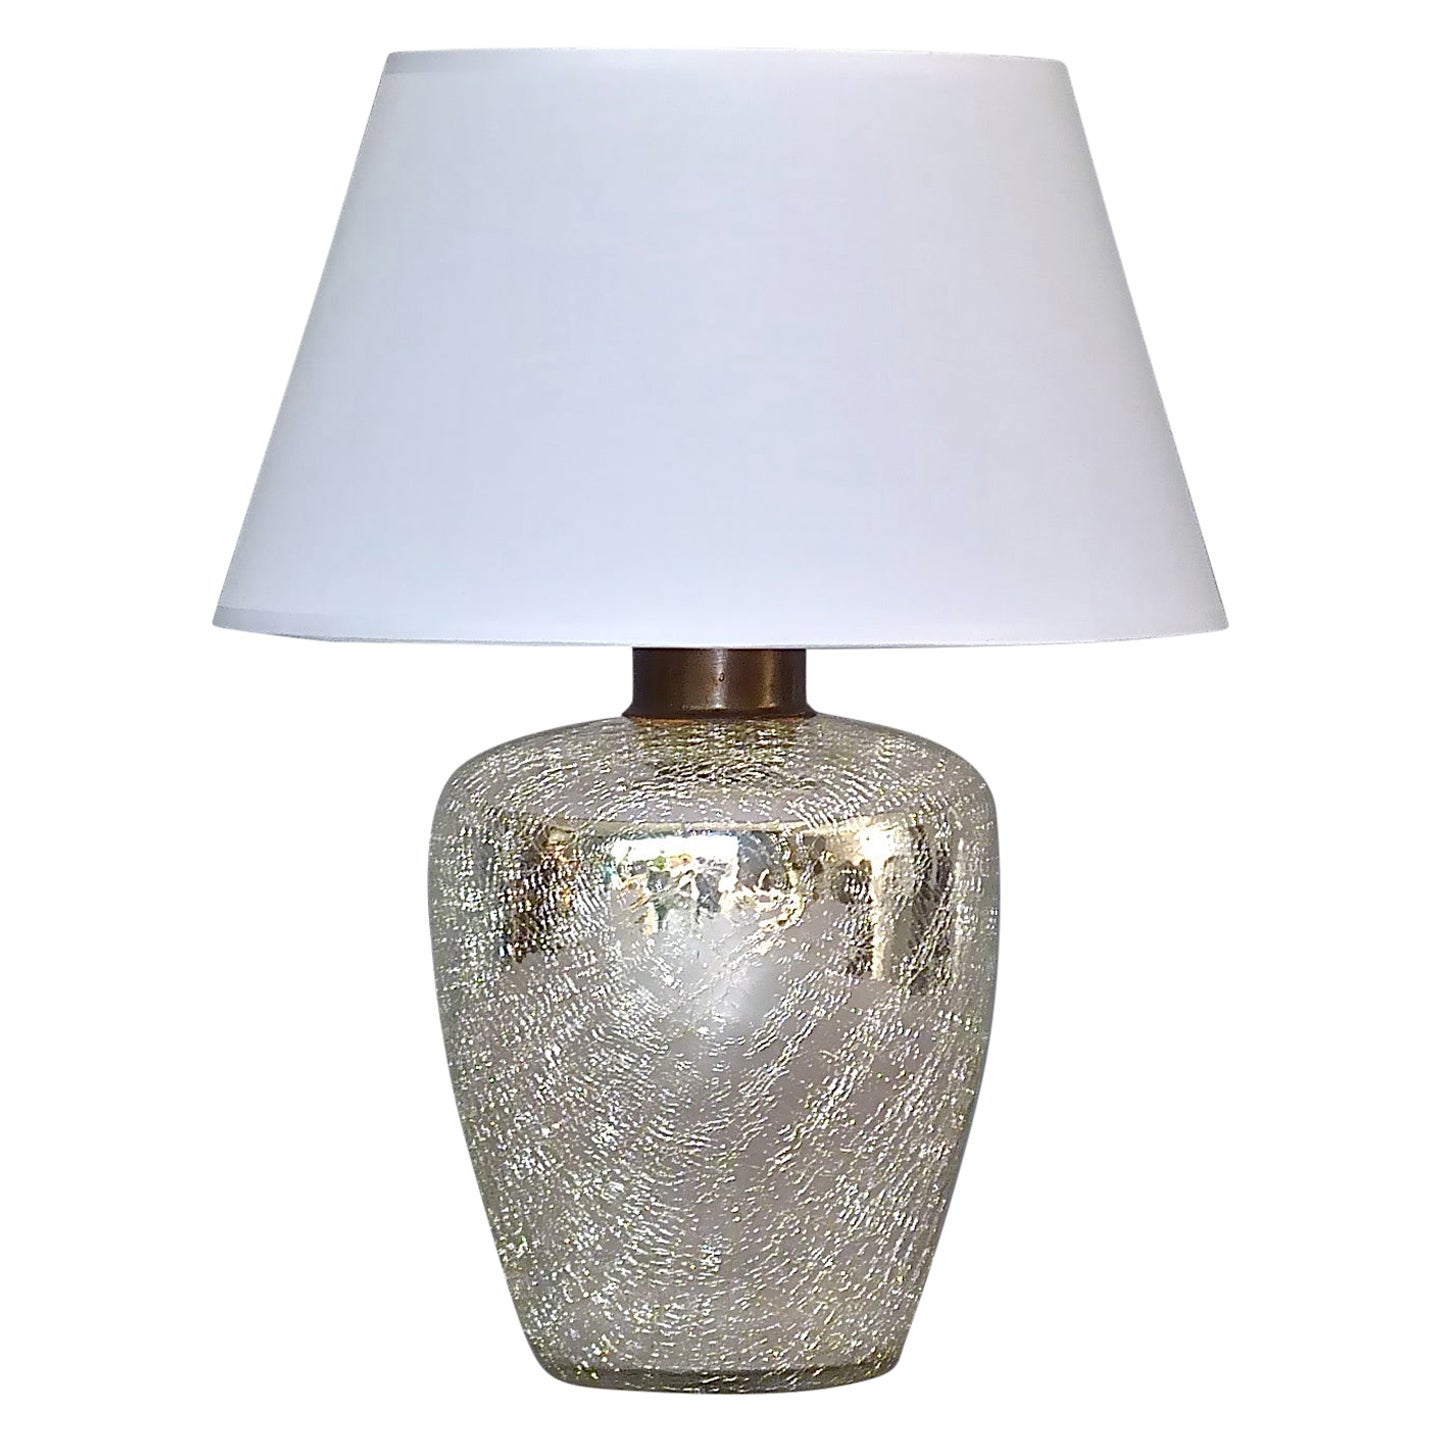 Rare Silver Art Deco Table Lamp Crackle Glass White Fabric Modernism France 1930 For Sale